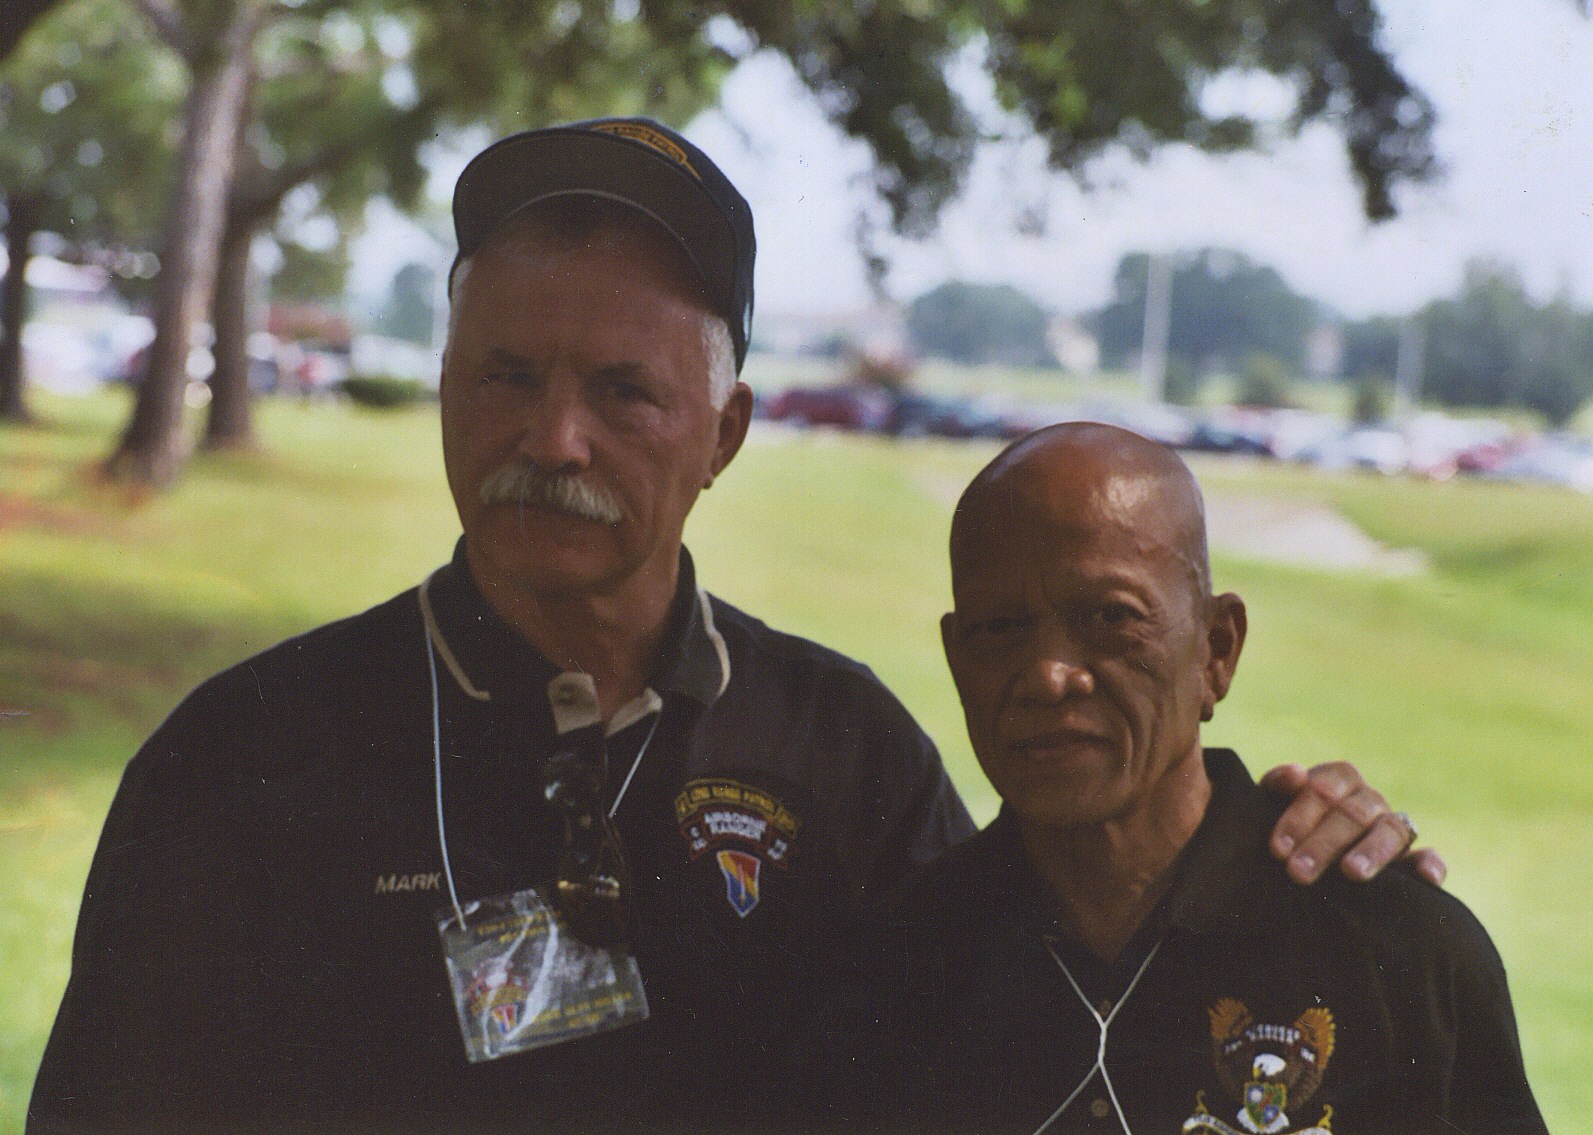 Mark Miller, Pat Tadina at 75th ranger reunion 2007.  Pat had 60 months in RVN as a recon man and had 111 credited kills